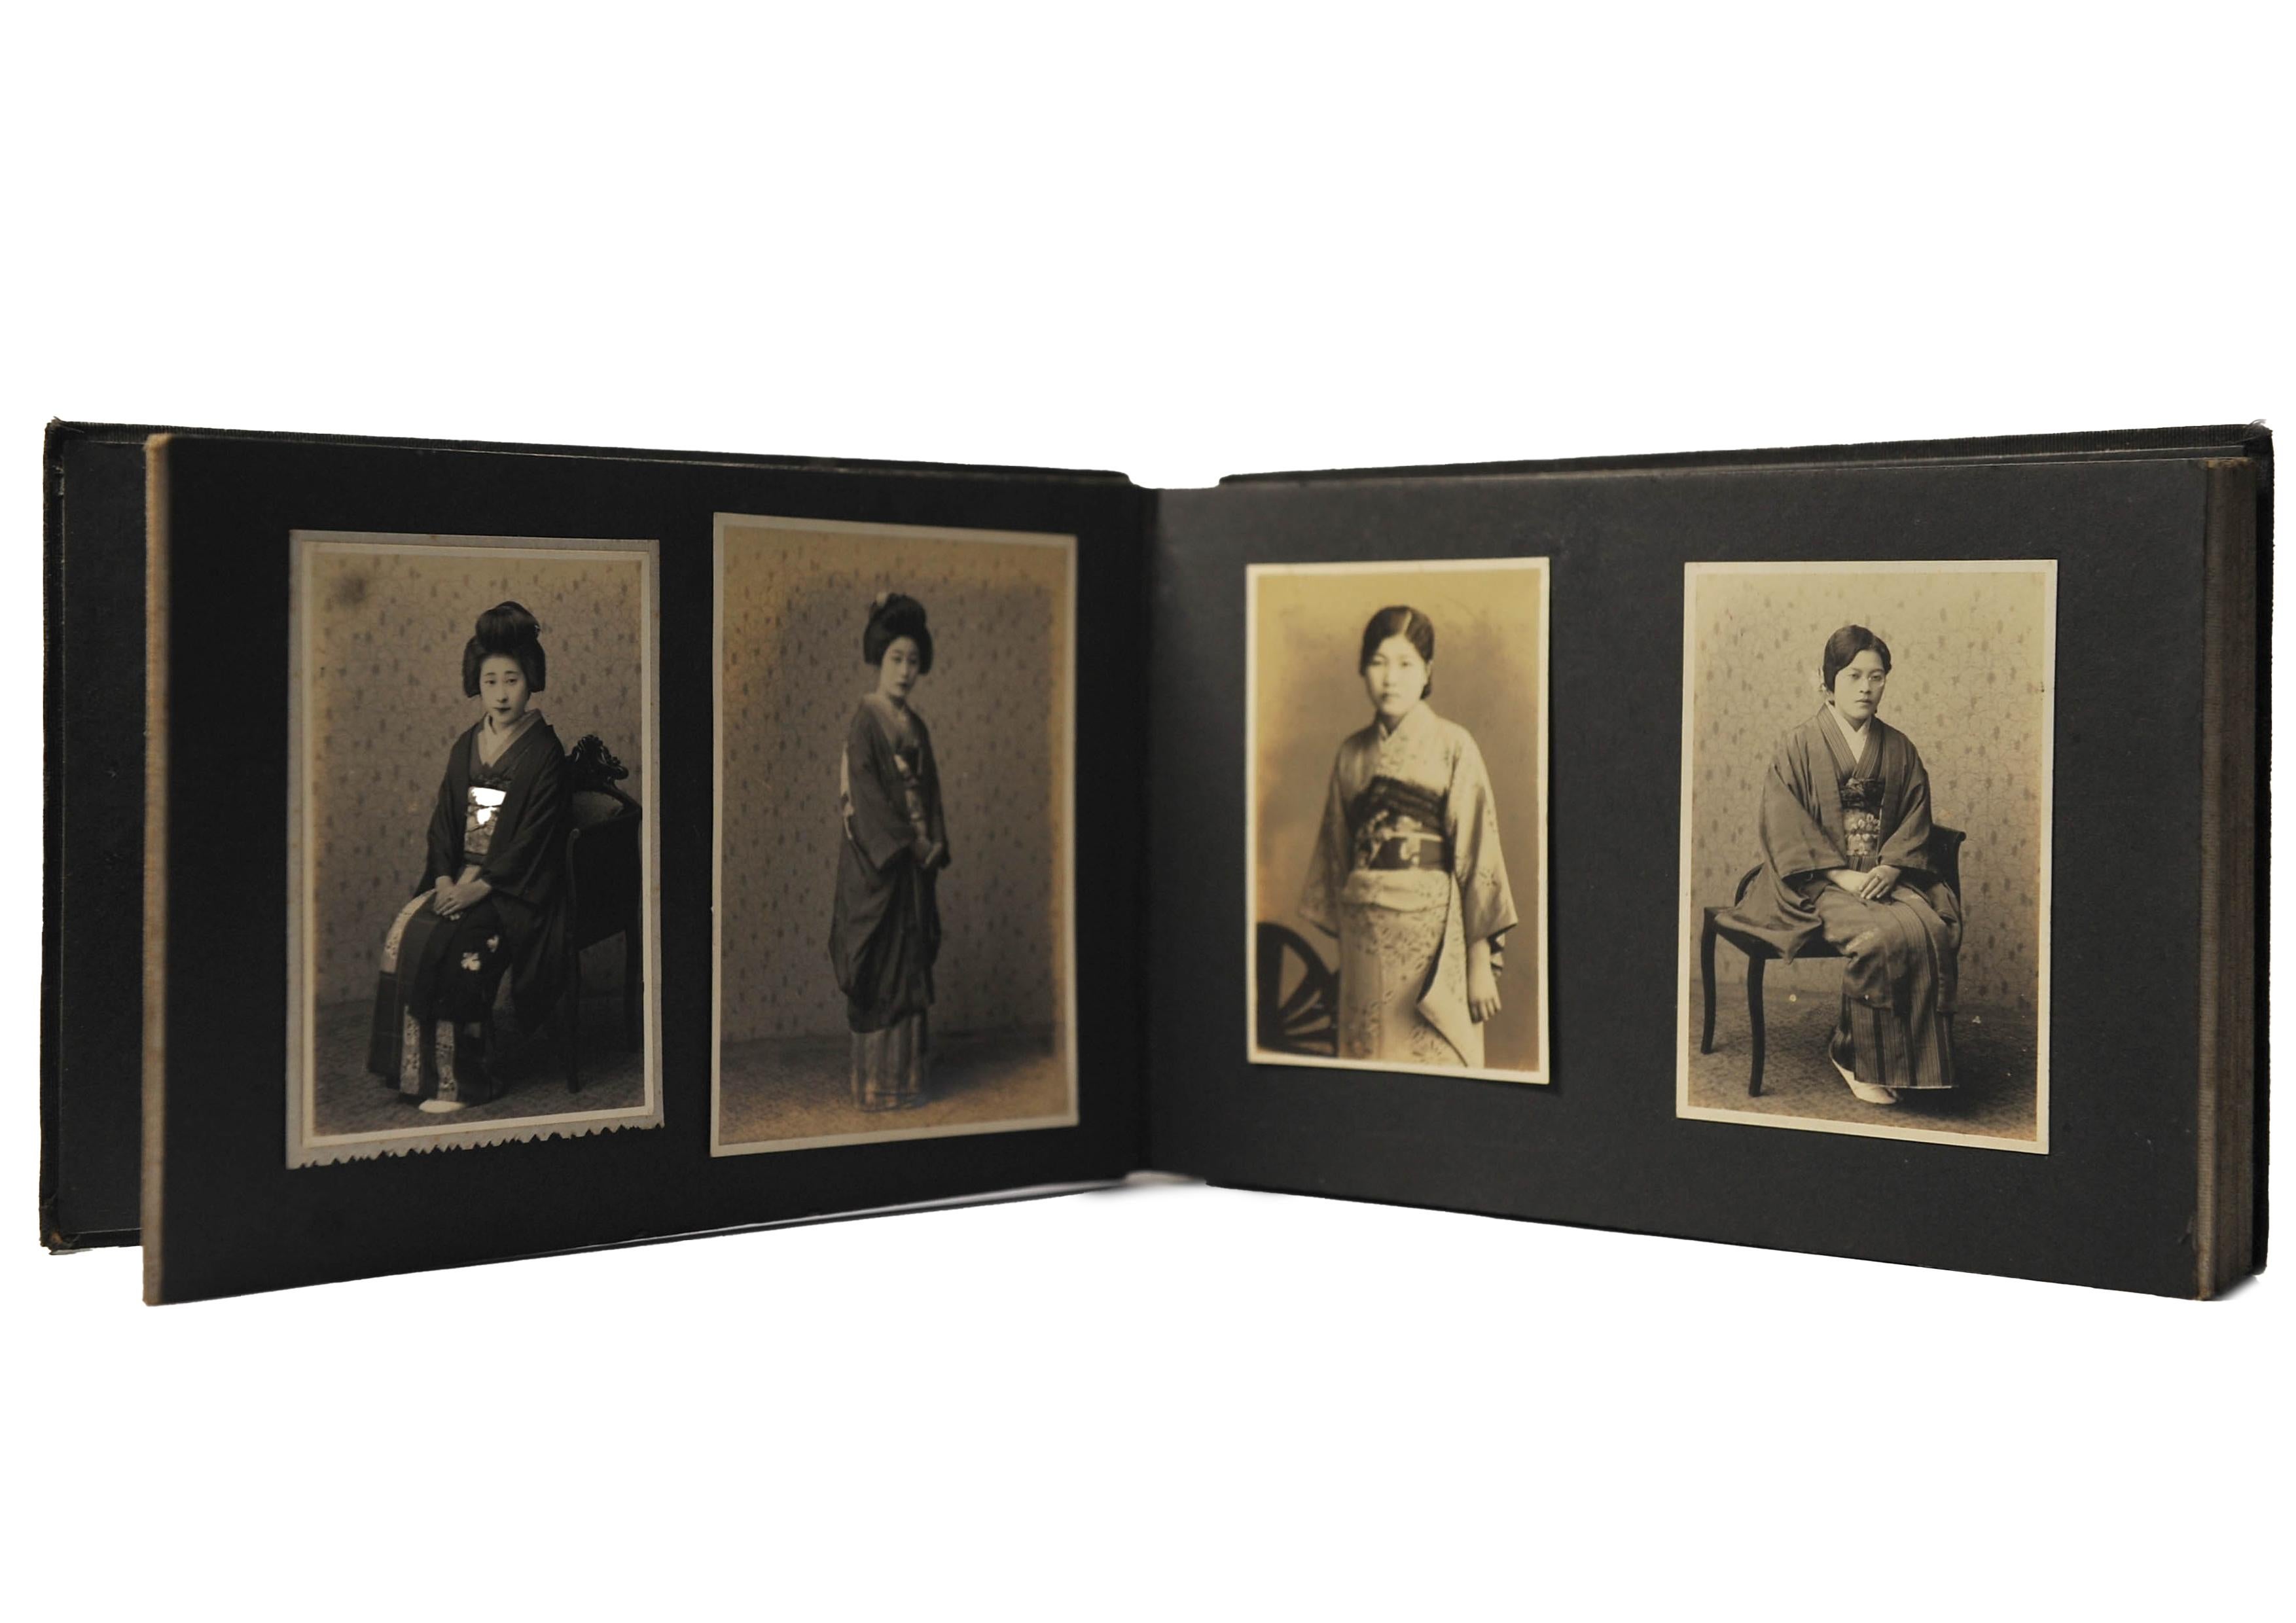 Japanese Art Deco Early 20th Century Photo Album With Photos Included For Sale 1